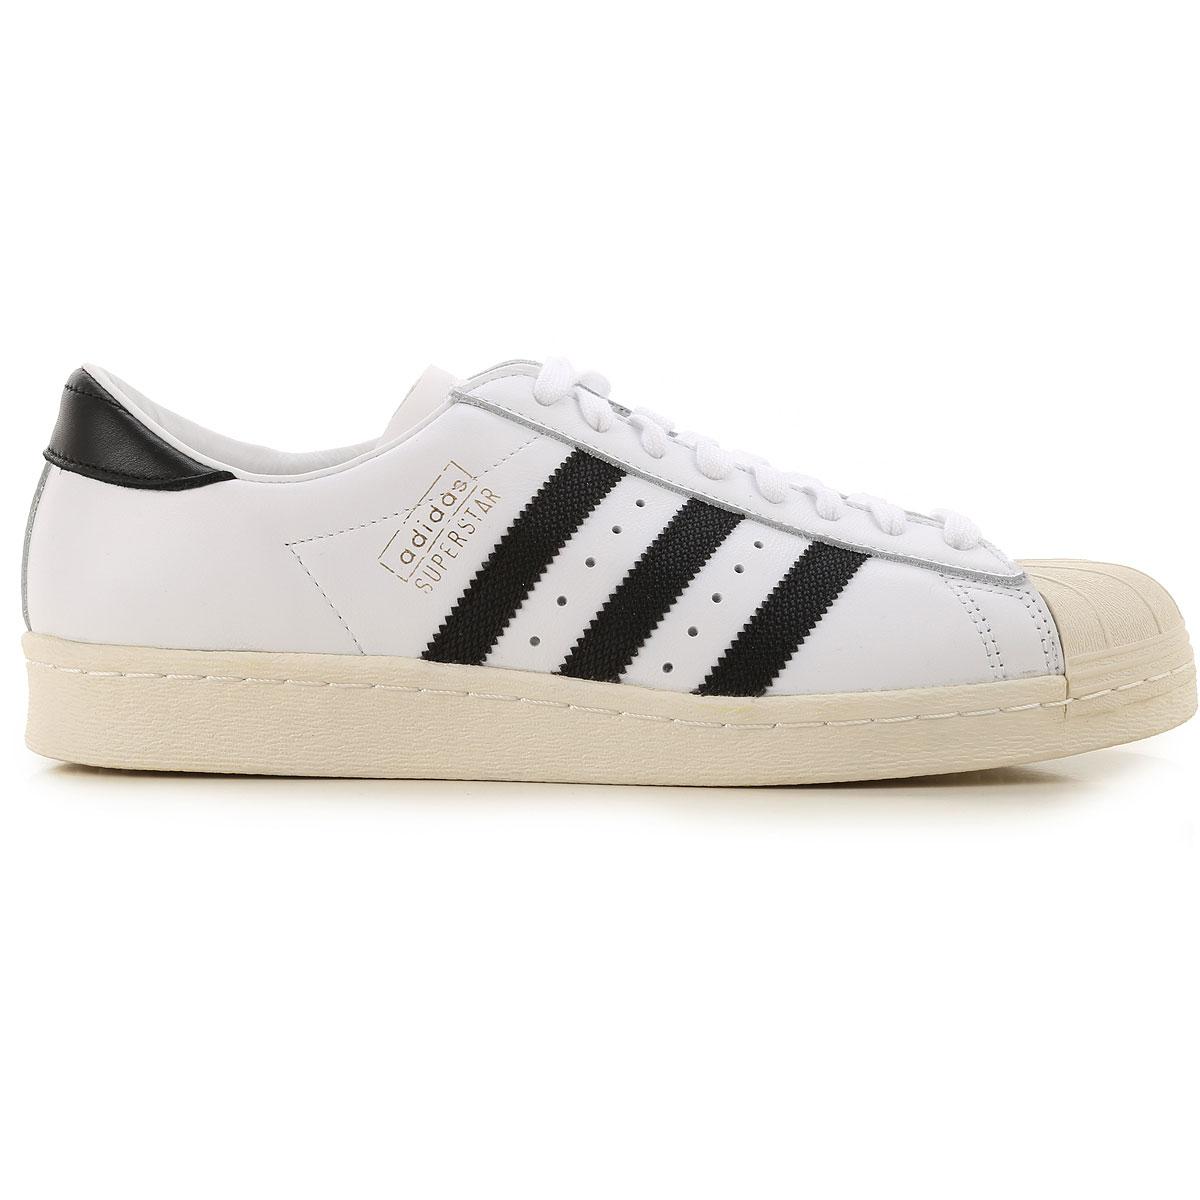 Mens Shoes Adidas, Style code: cq2475 